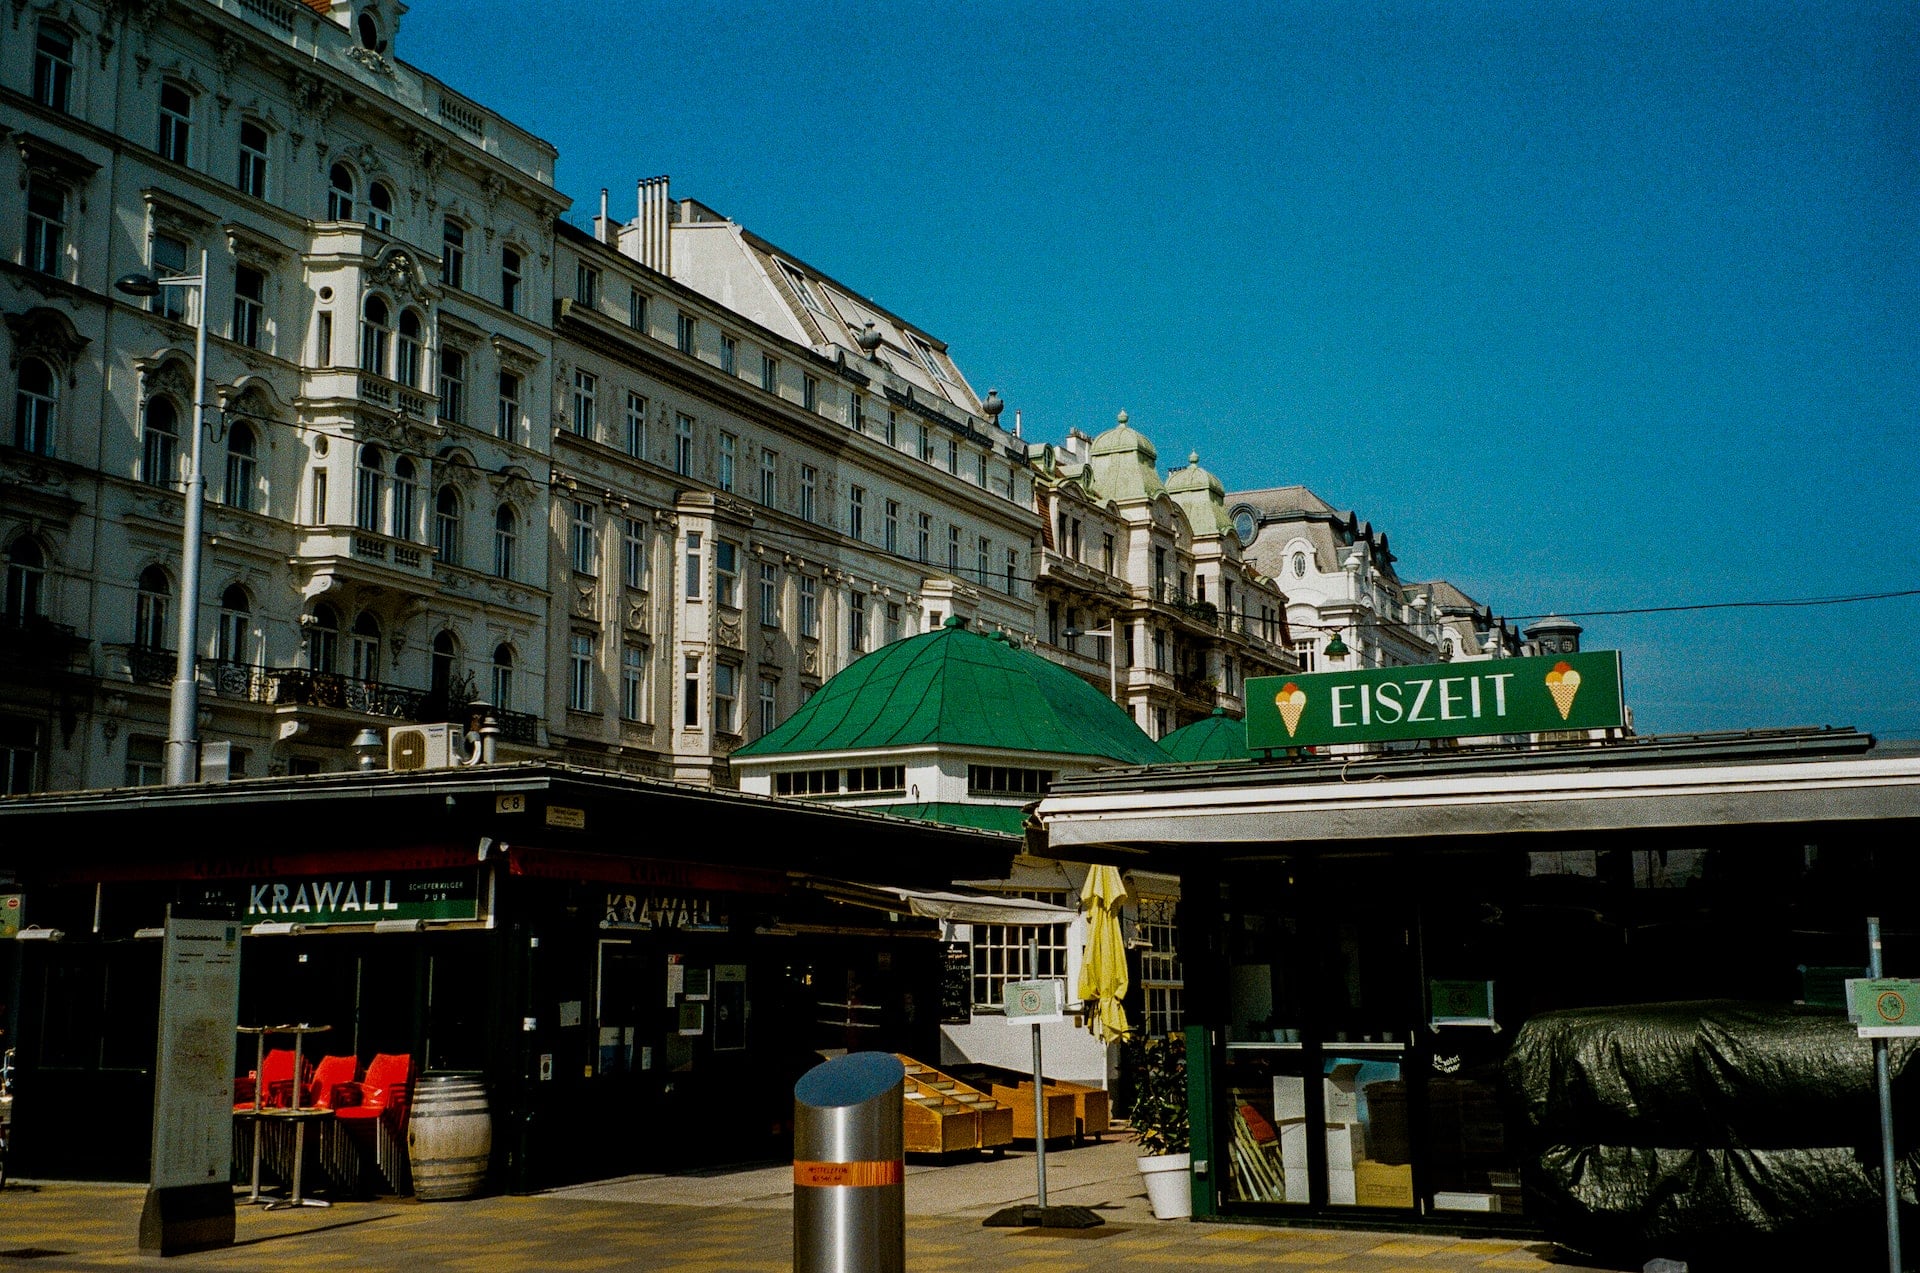 Home to the Naschmarkt, Mariahilf is an upbeat and alternative district in Vienna